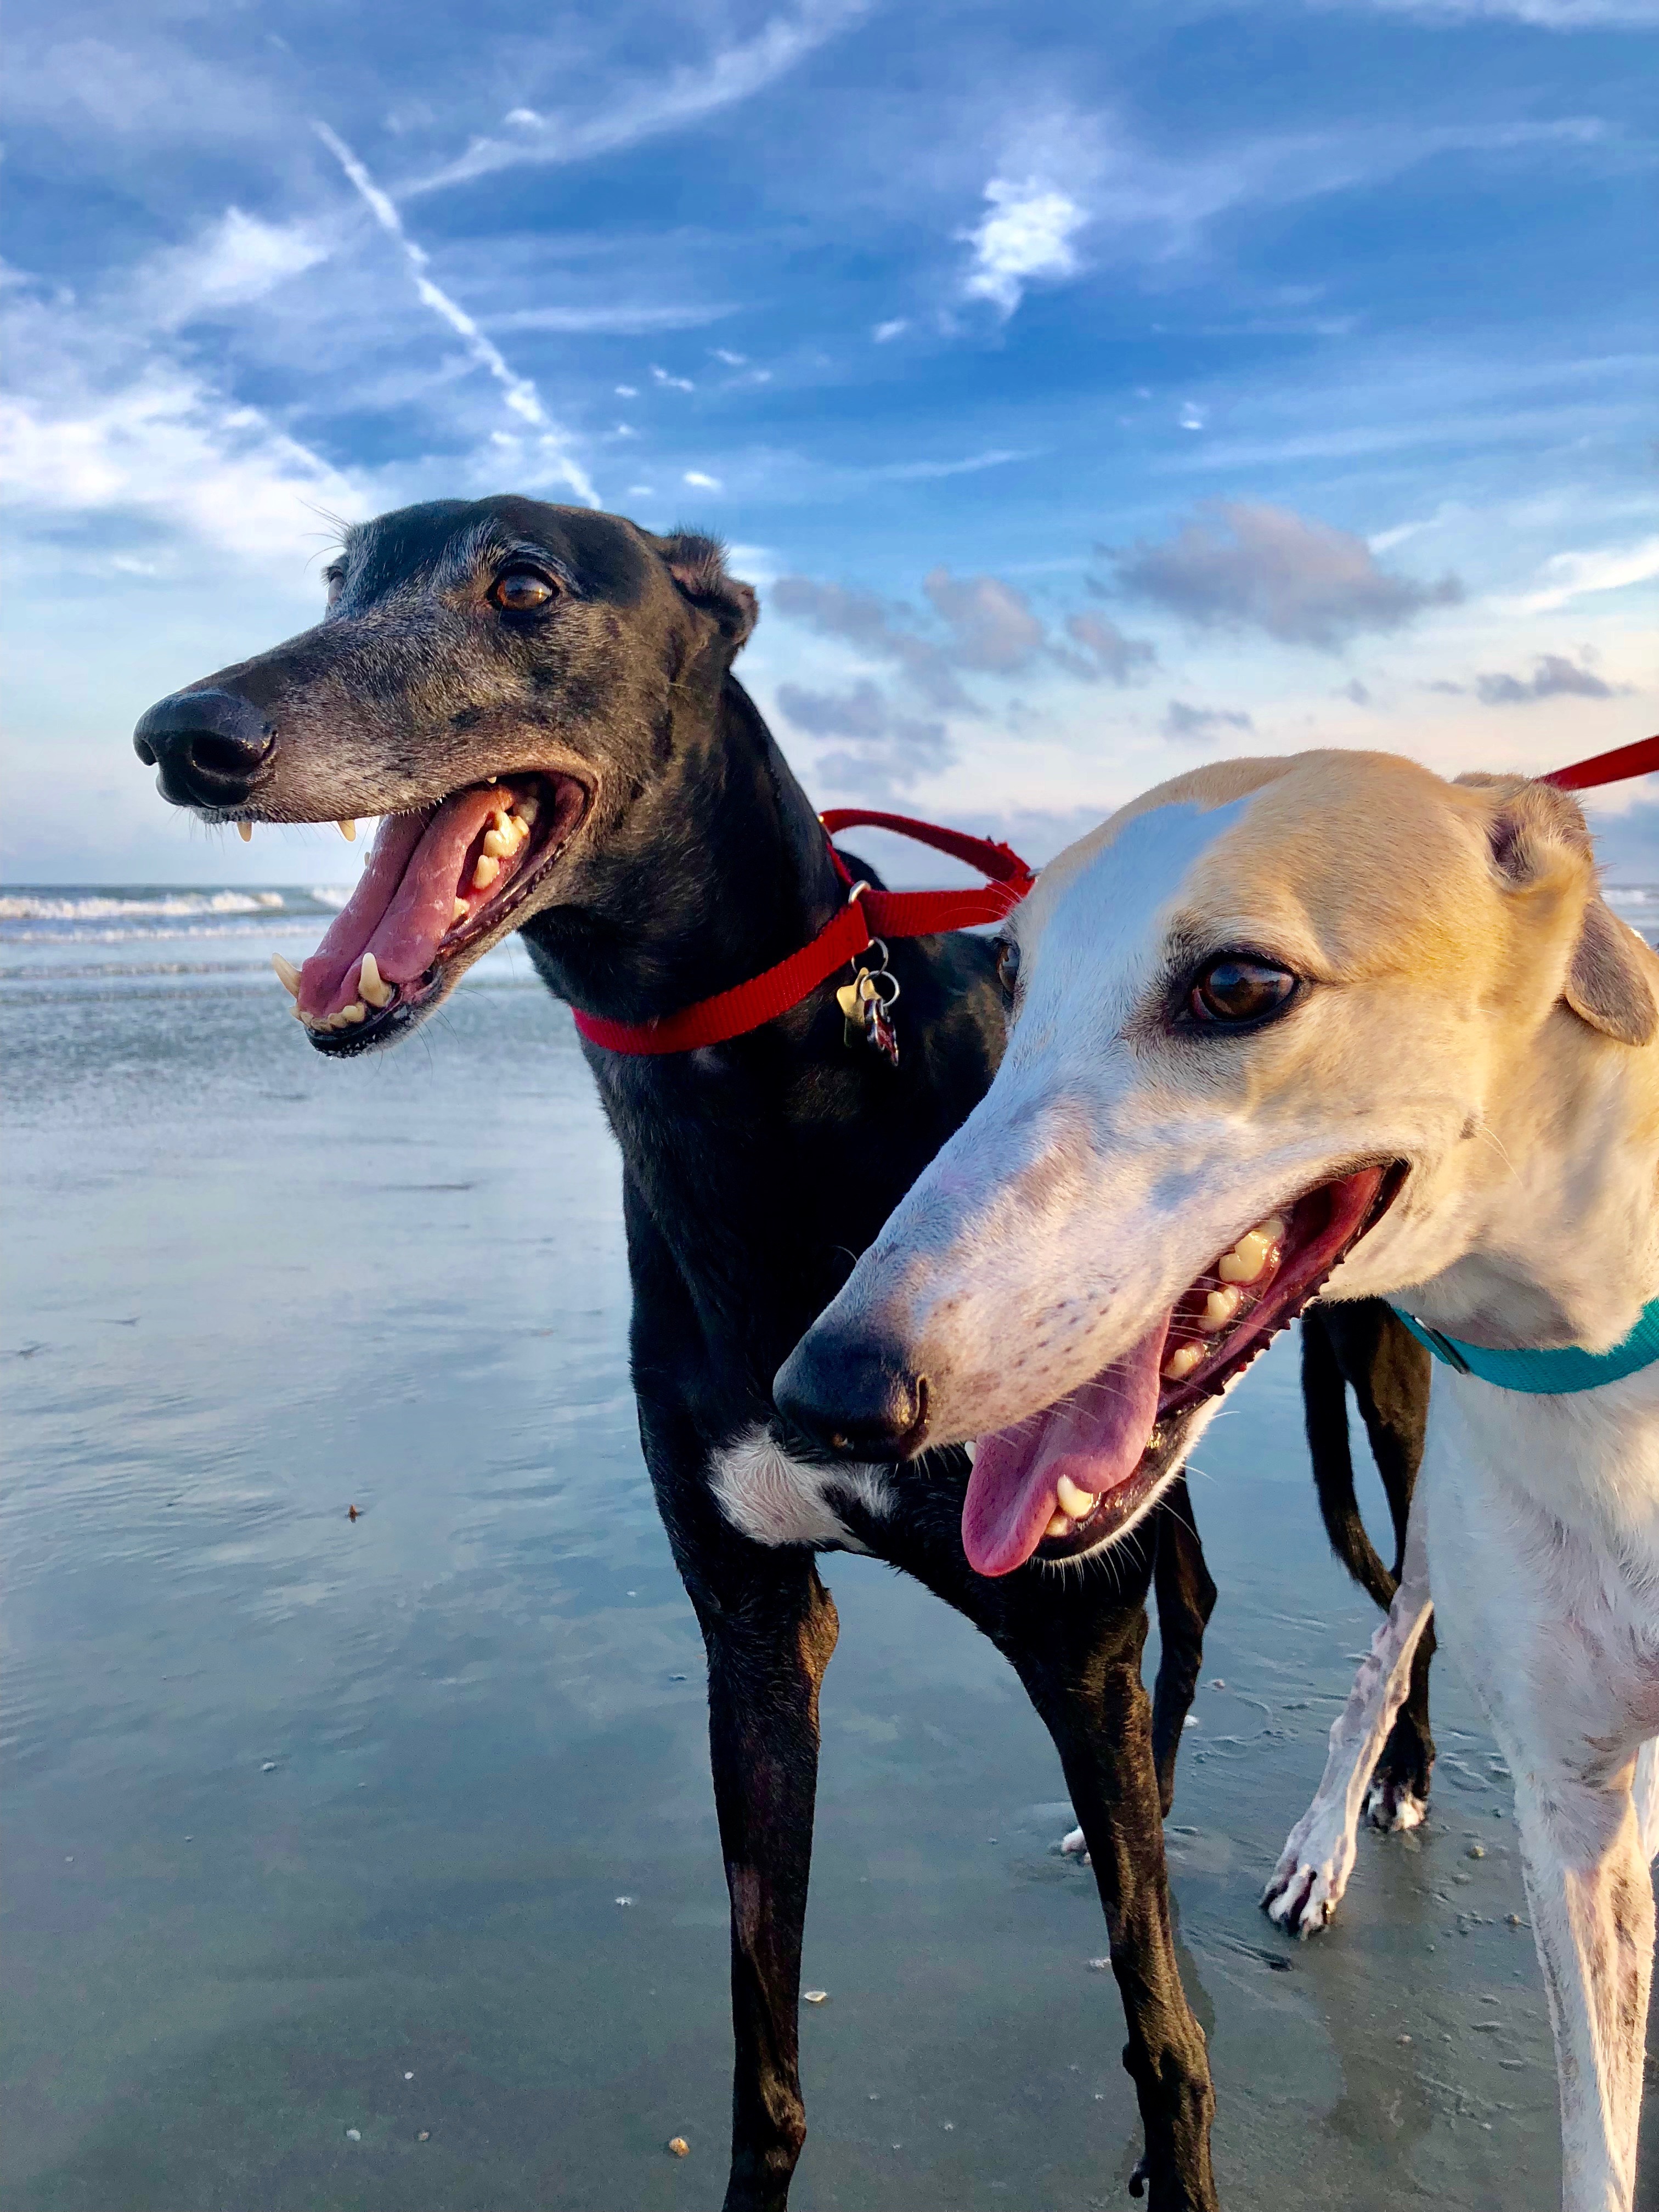 Ark and Hillary, our two greyhounds, on the beach in 2019.